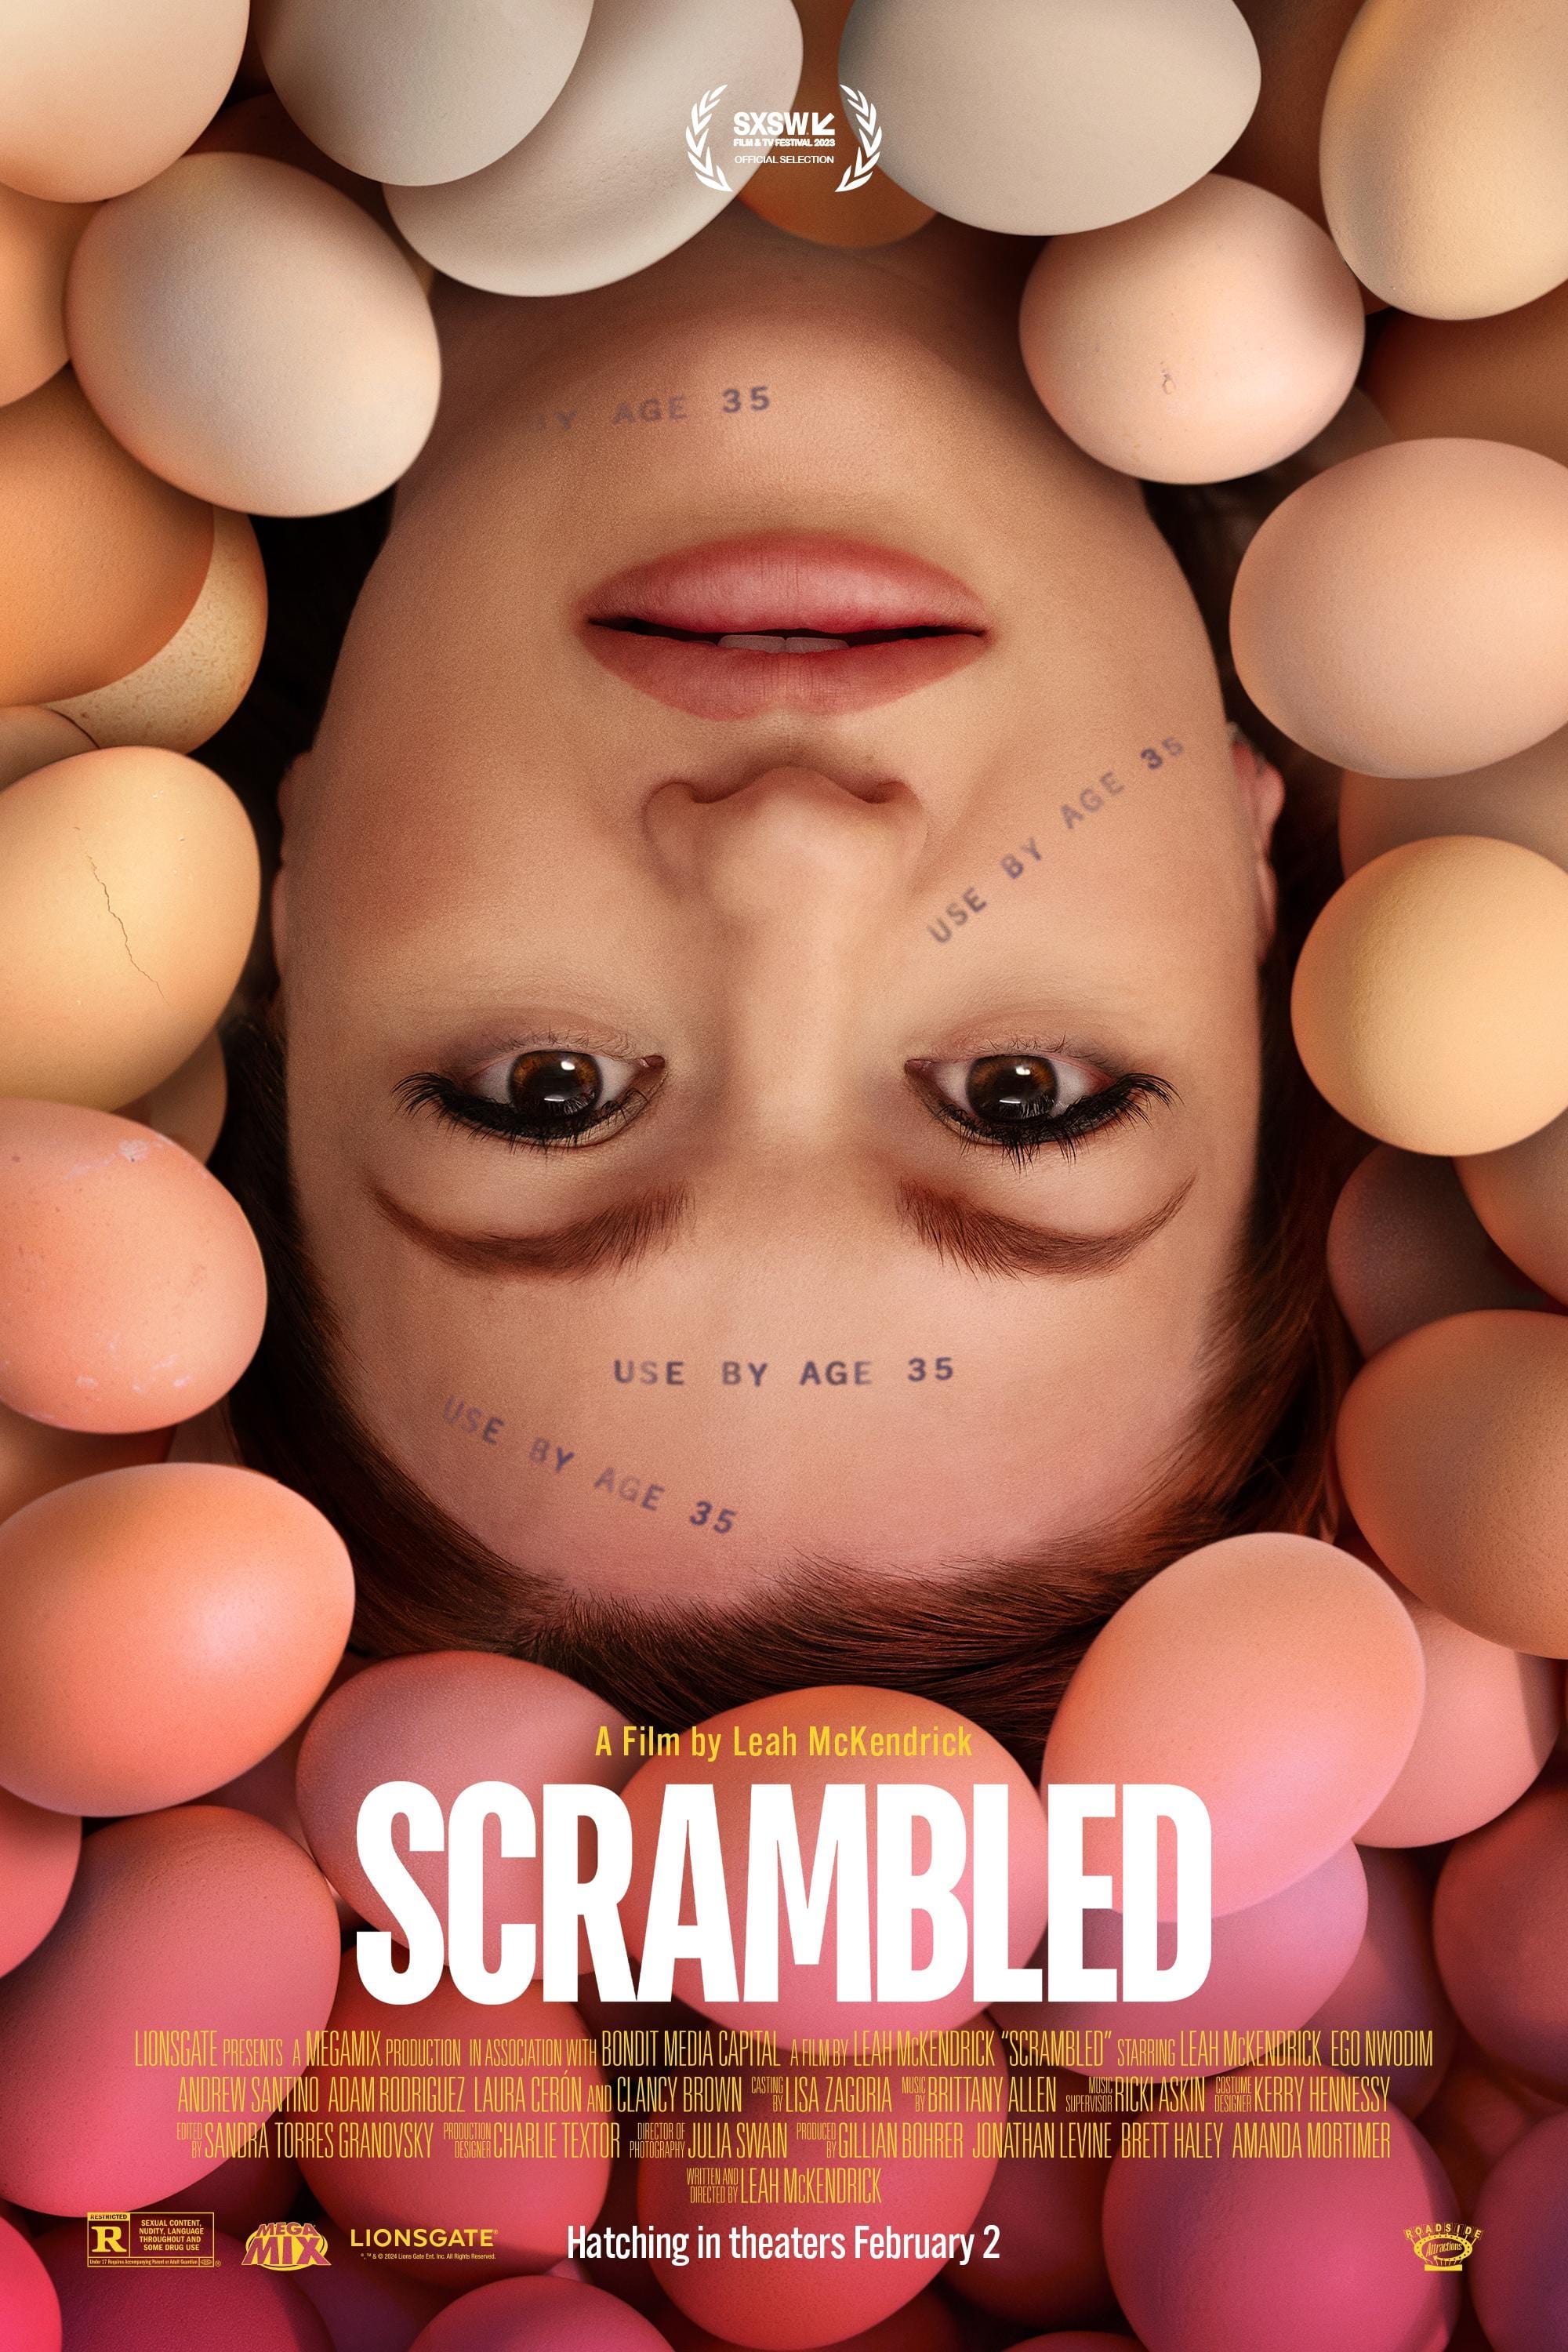 Poster for the movie "Scrambled"